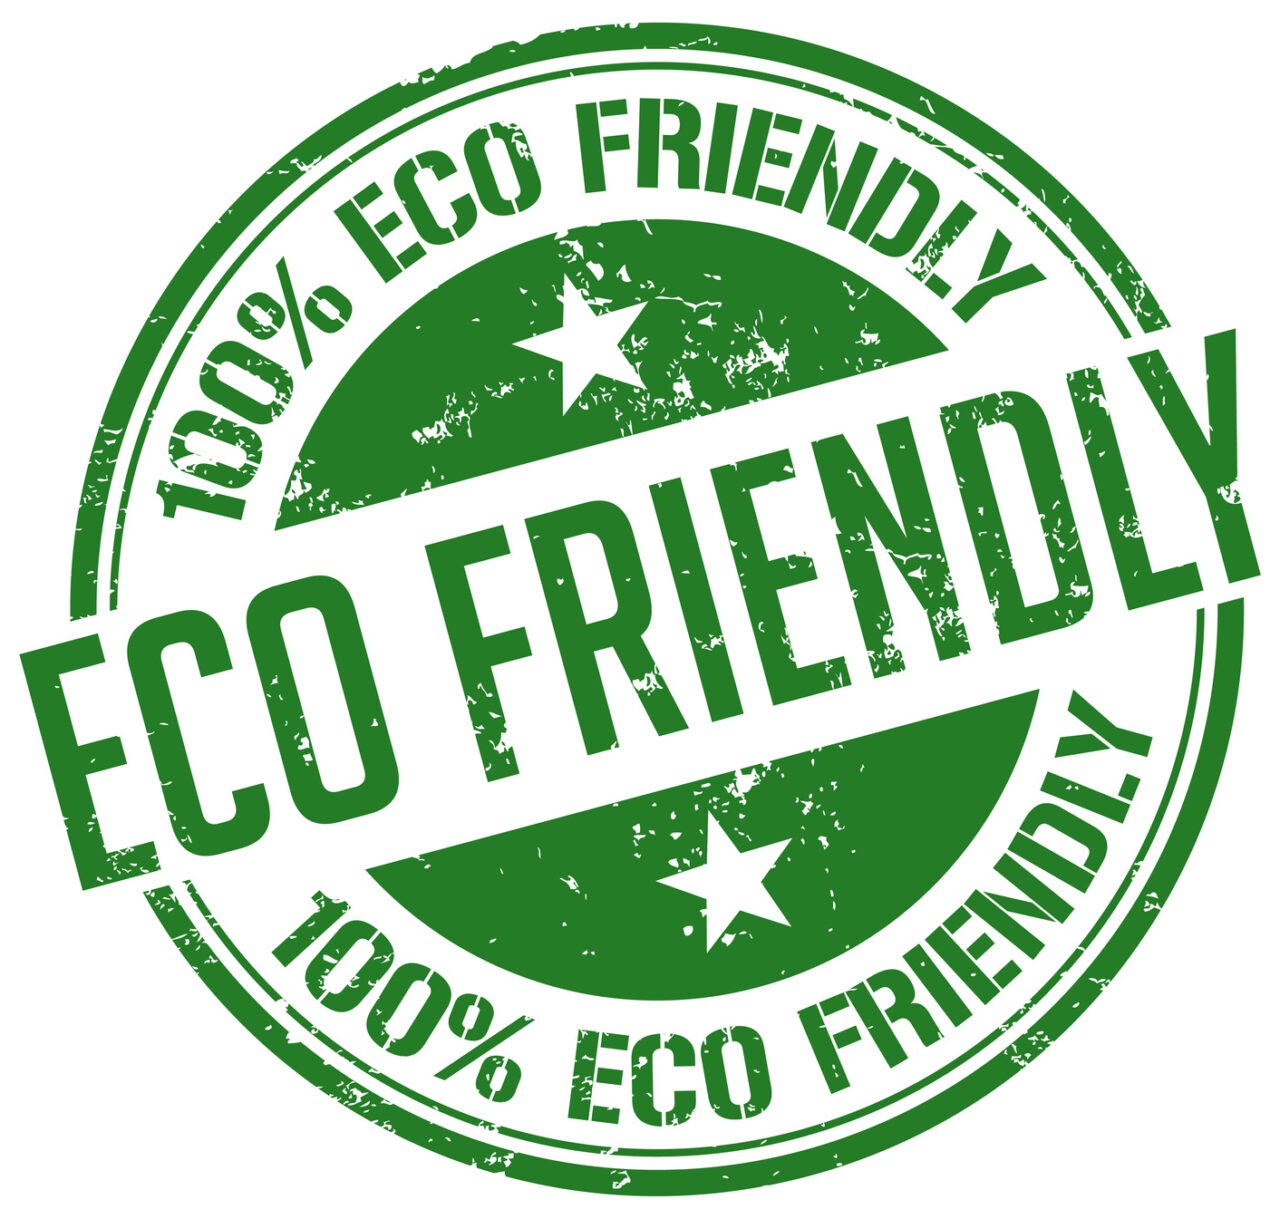 Eco friendly products logo